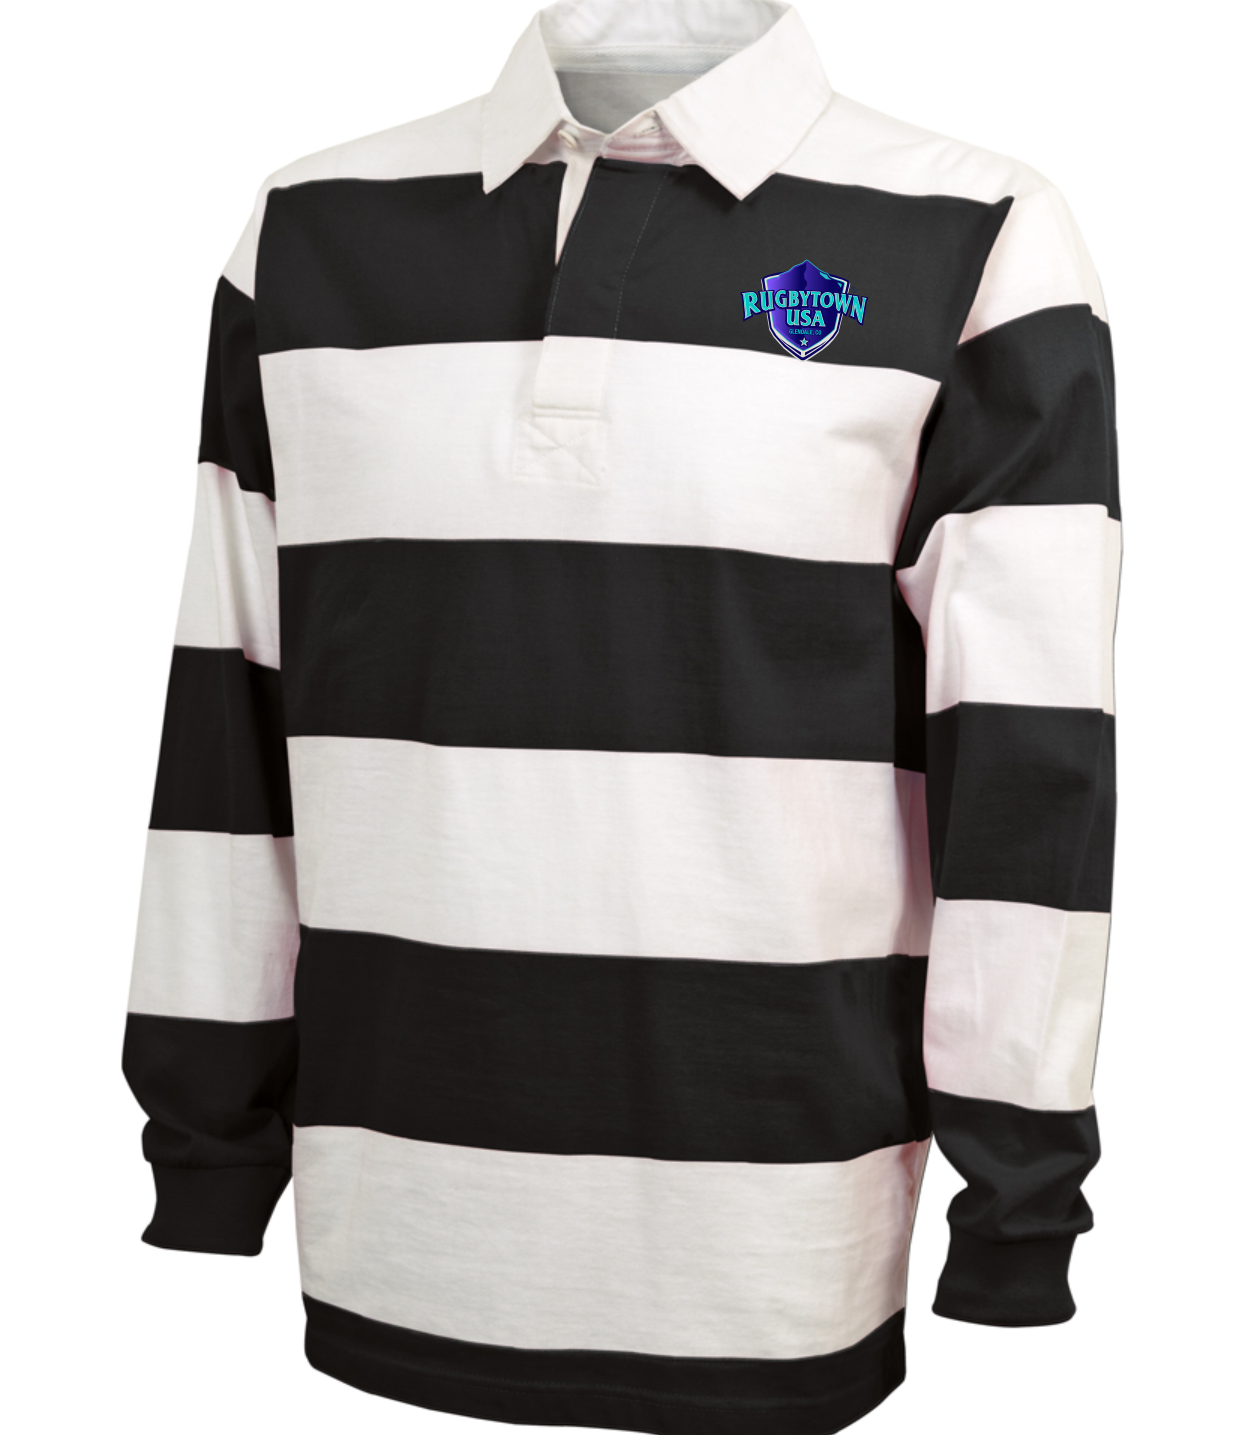 RUGBYTOWN USA CLASSIC RUGBY SHIRT